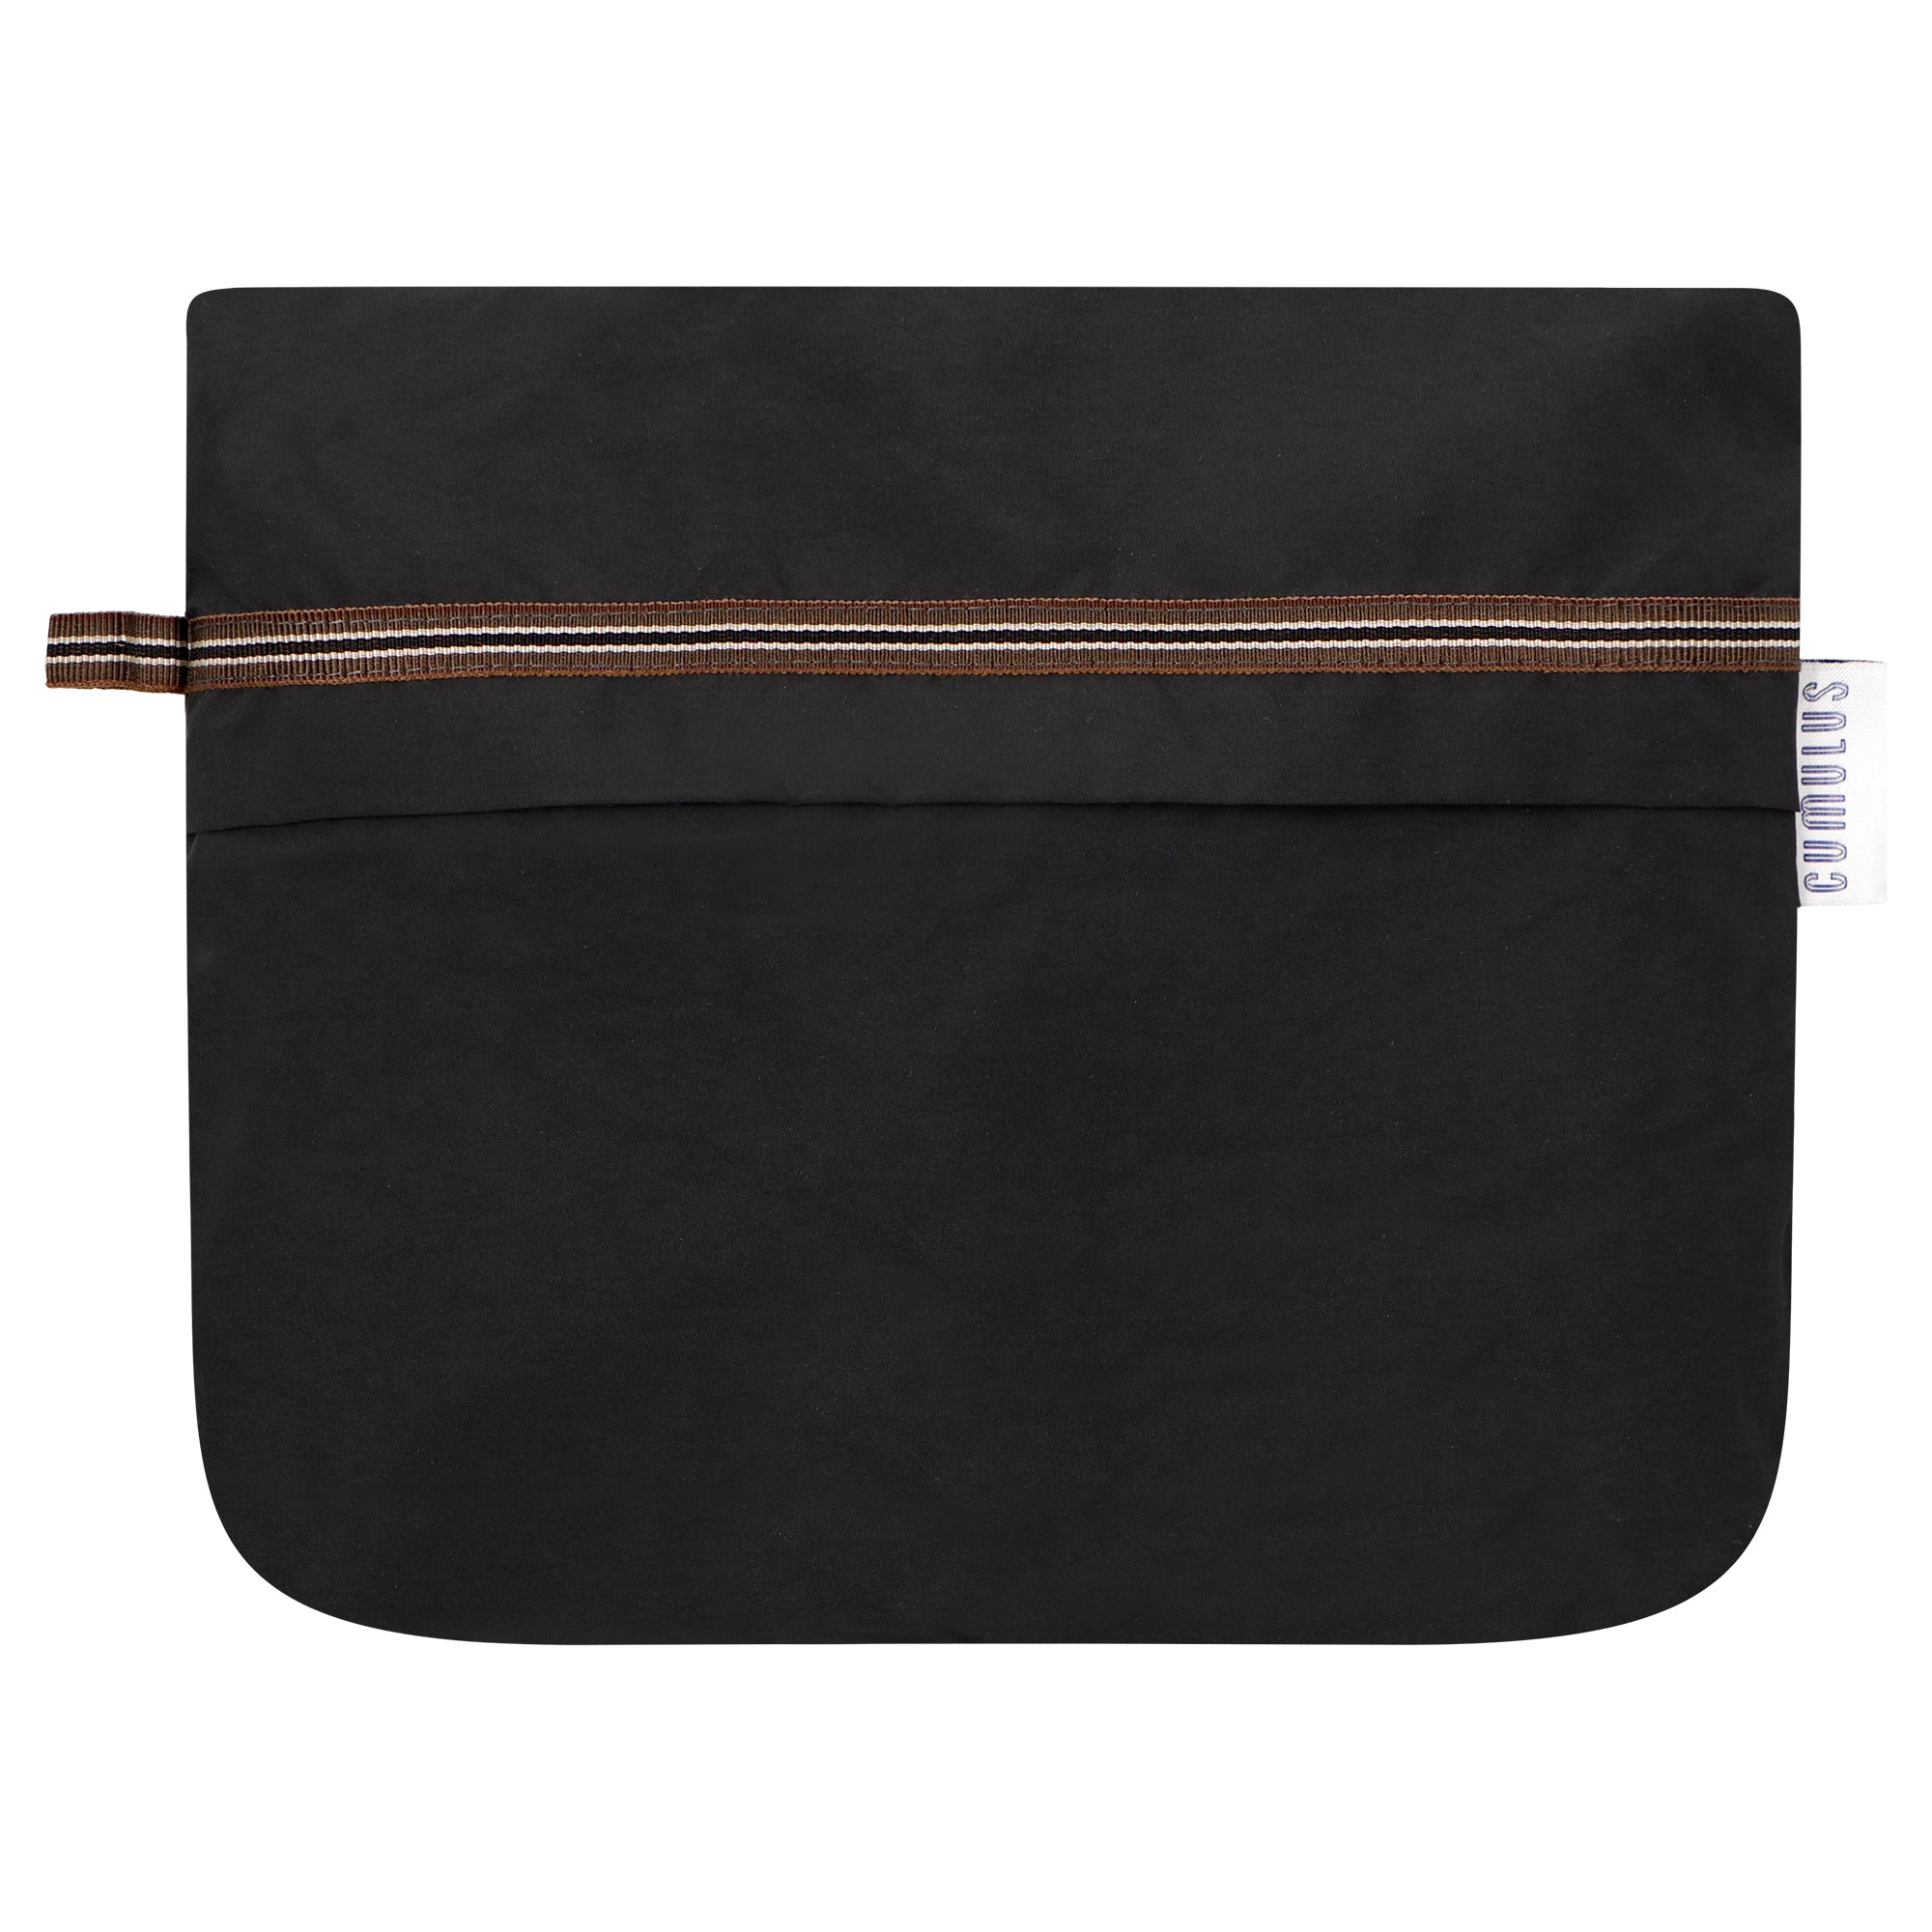 Bise - Anthracite - pouch bag